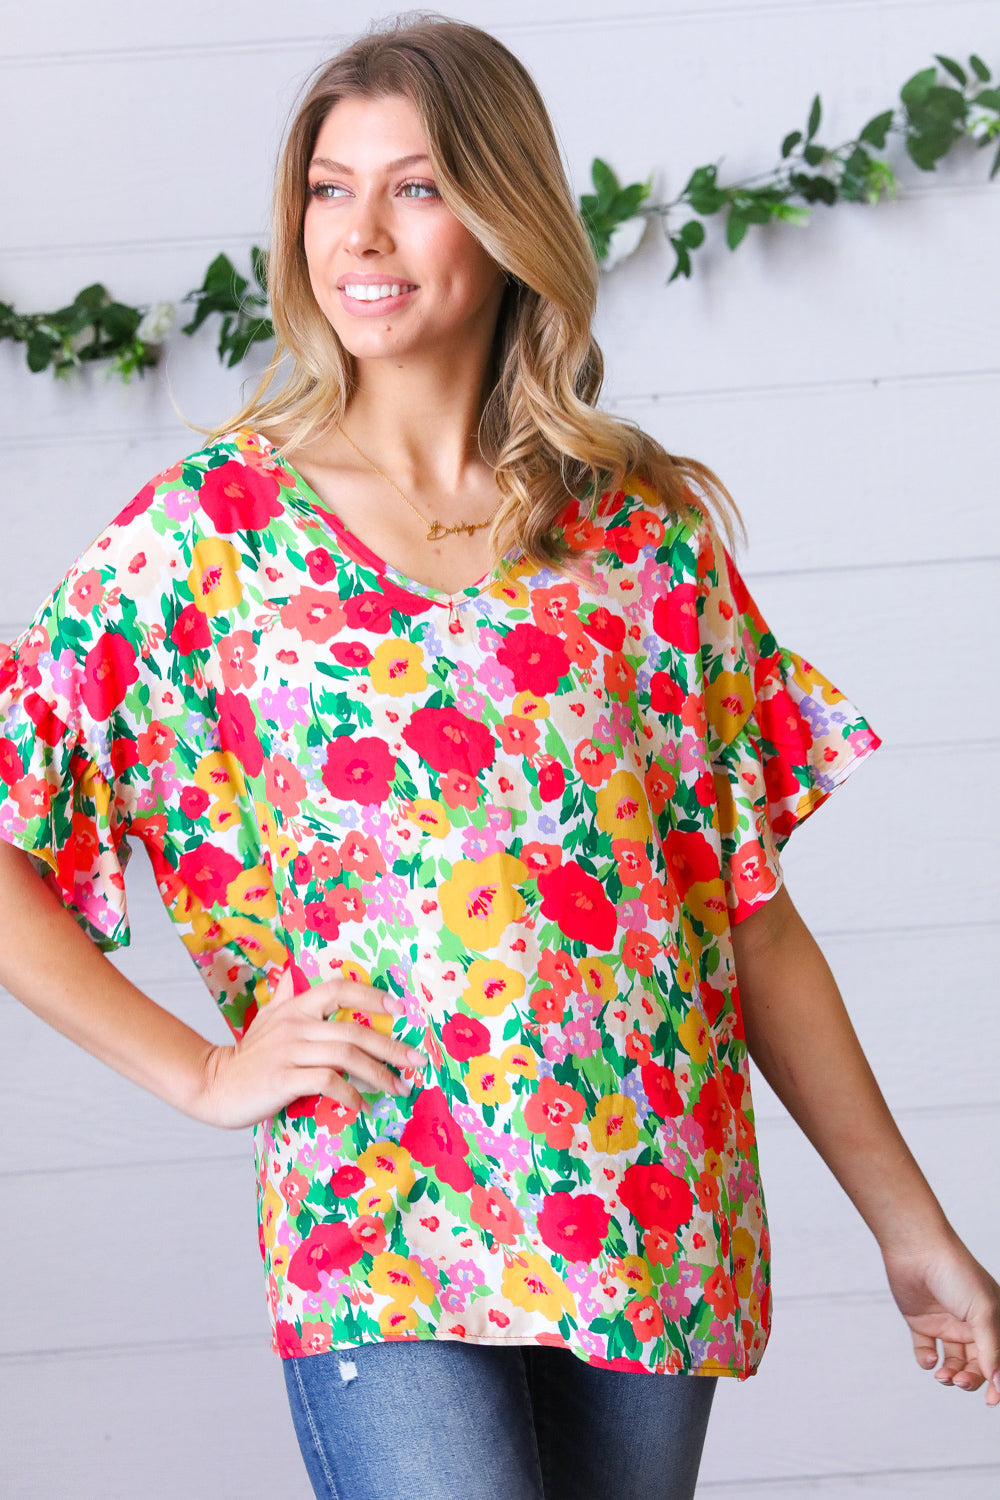 FINAL SALE - Defect - Red Floral Ruffle Sleeve V Neck Dolman Blouse - Size S